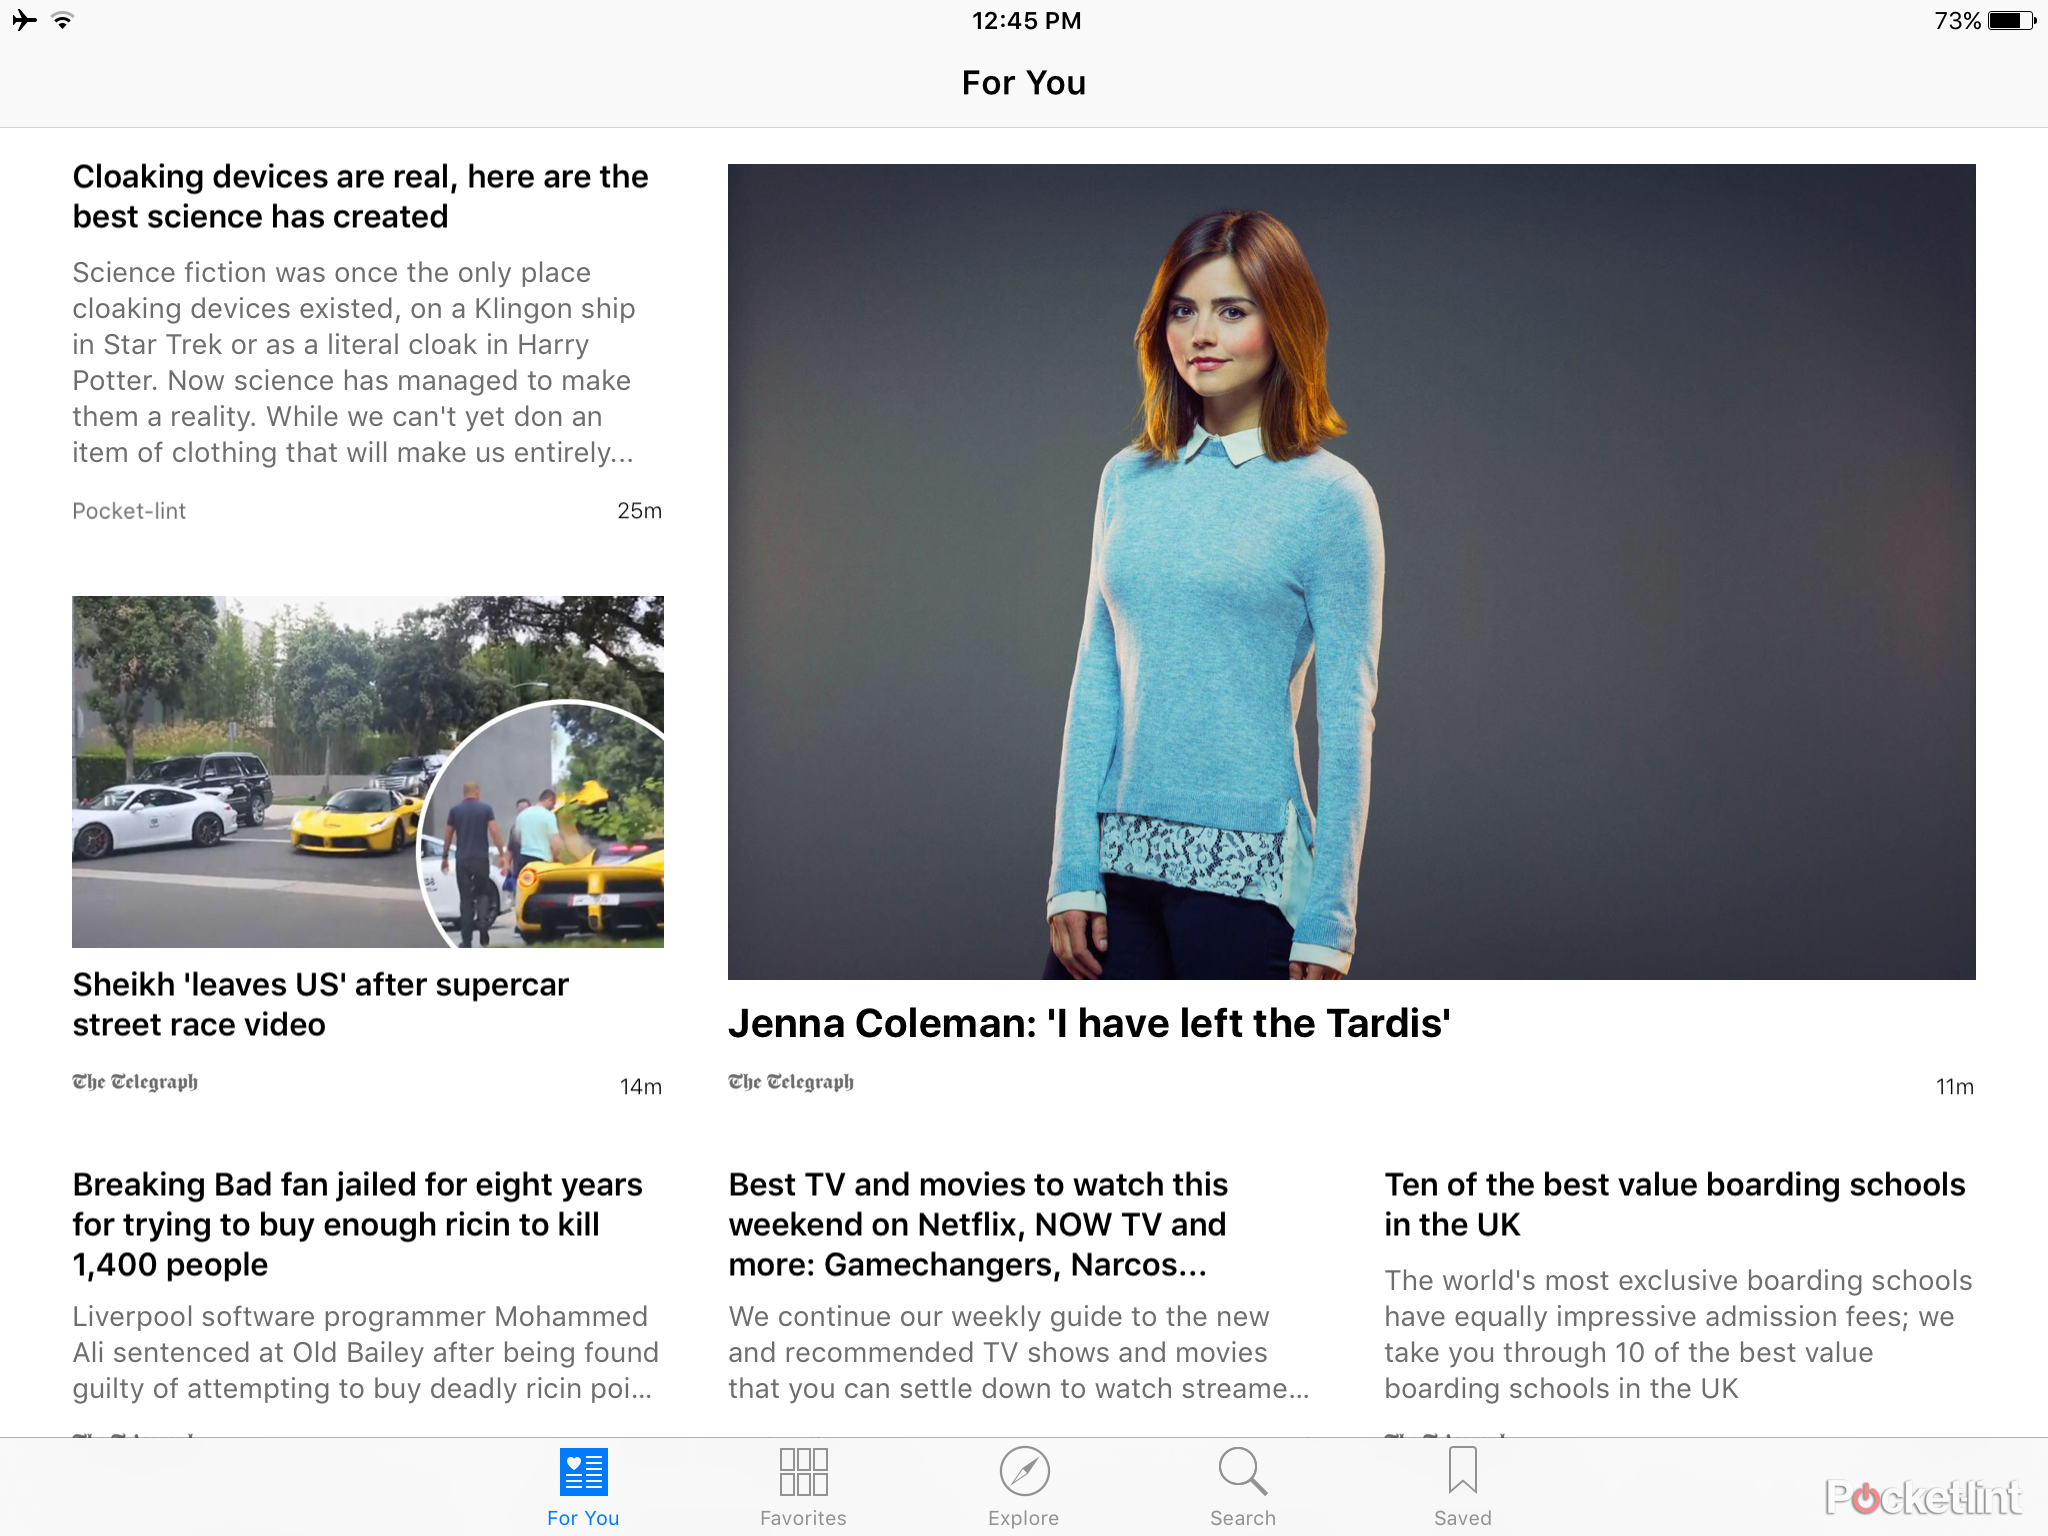 apple ios 9 1 out with new emoji apple news in uk and live photos fix image 3